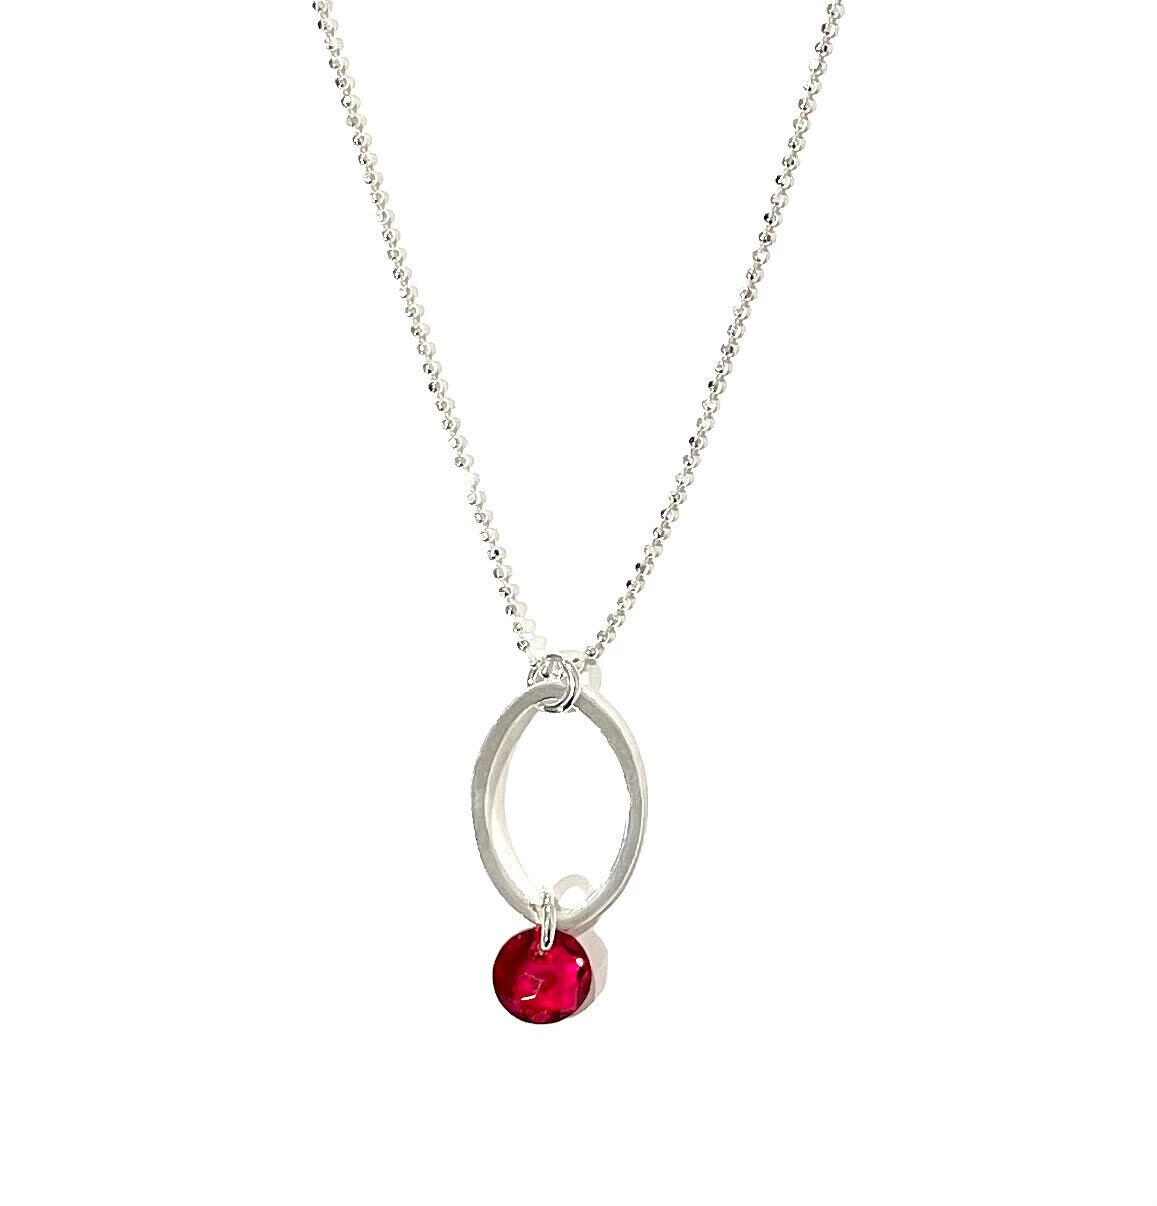 Oval with Red Crystal Necklace- Shy Giraffe 